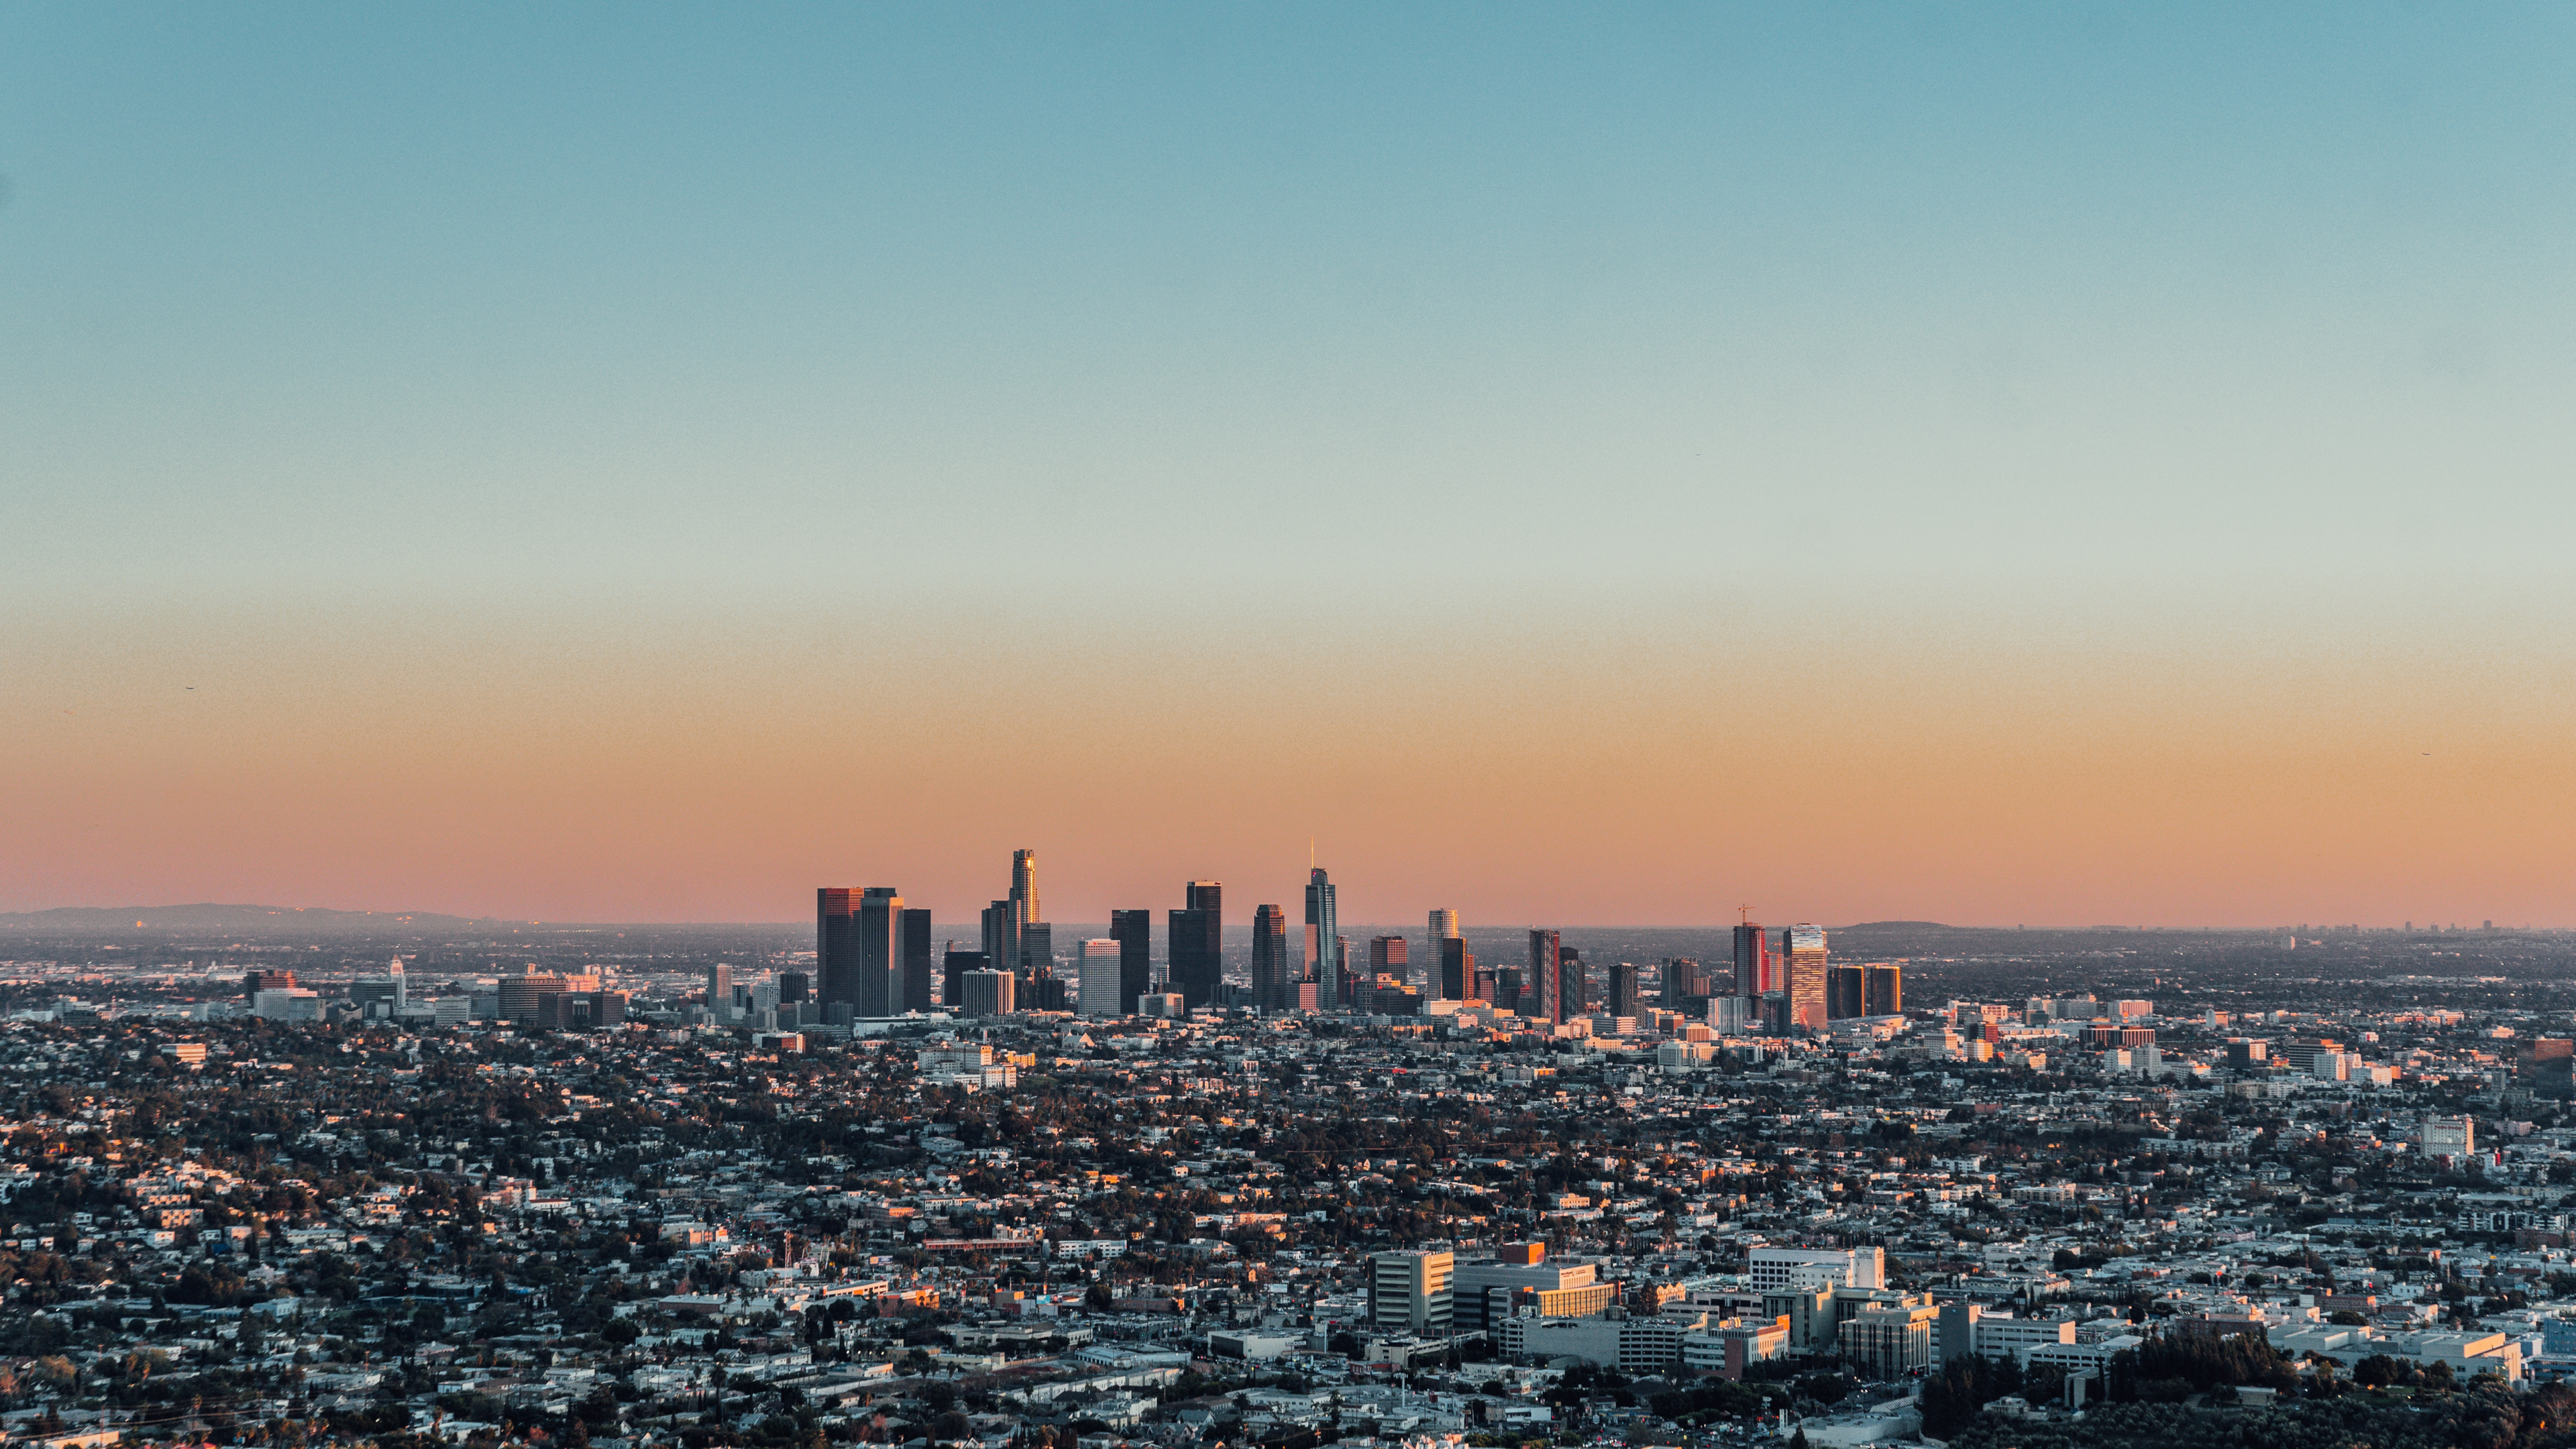 Skyline view of Los Angeles. Photo by Josh Miller